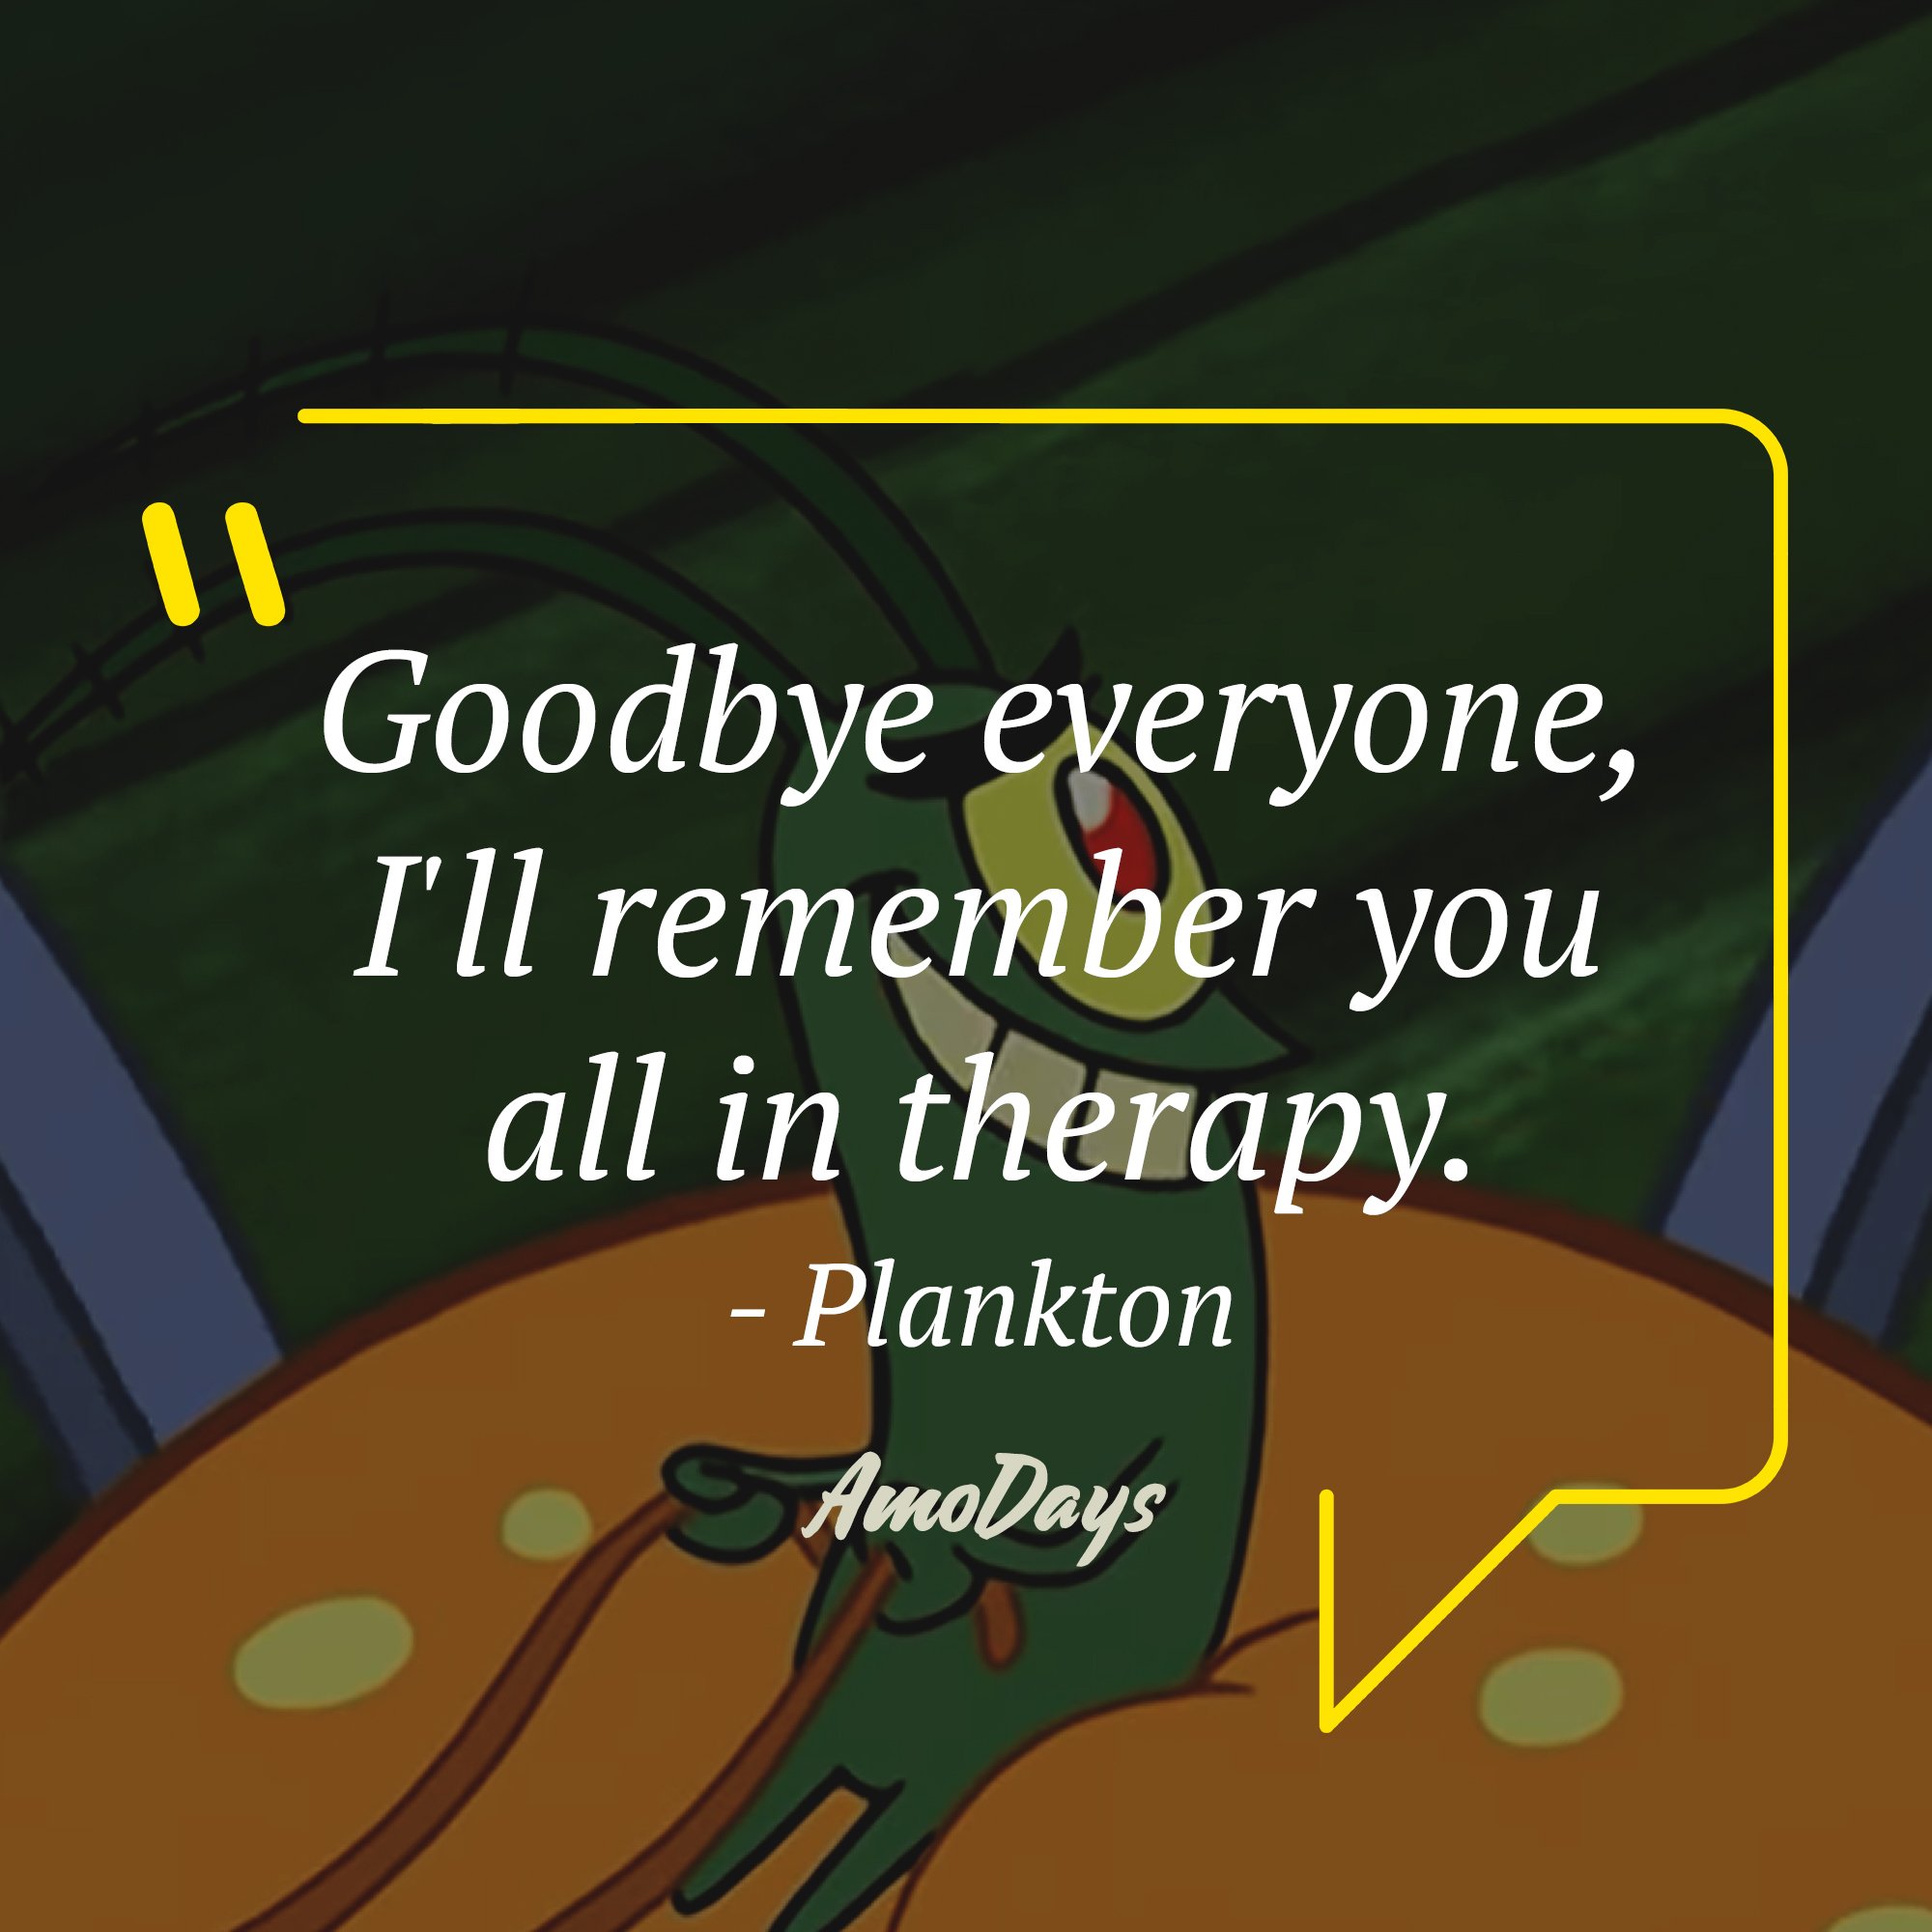 Plankton's quote: "Goodbye everybody, I'll remember you in therapy!" | Image: AmoDays